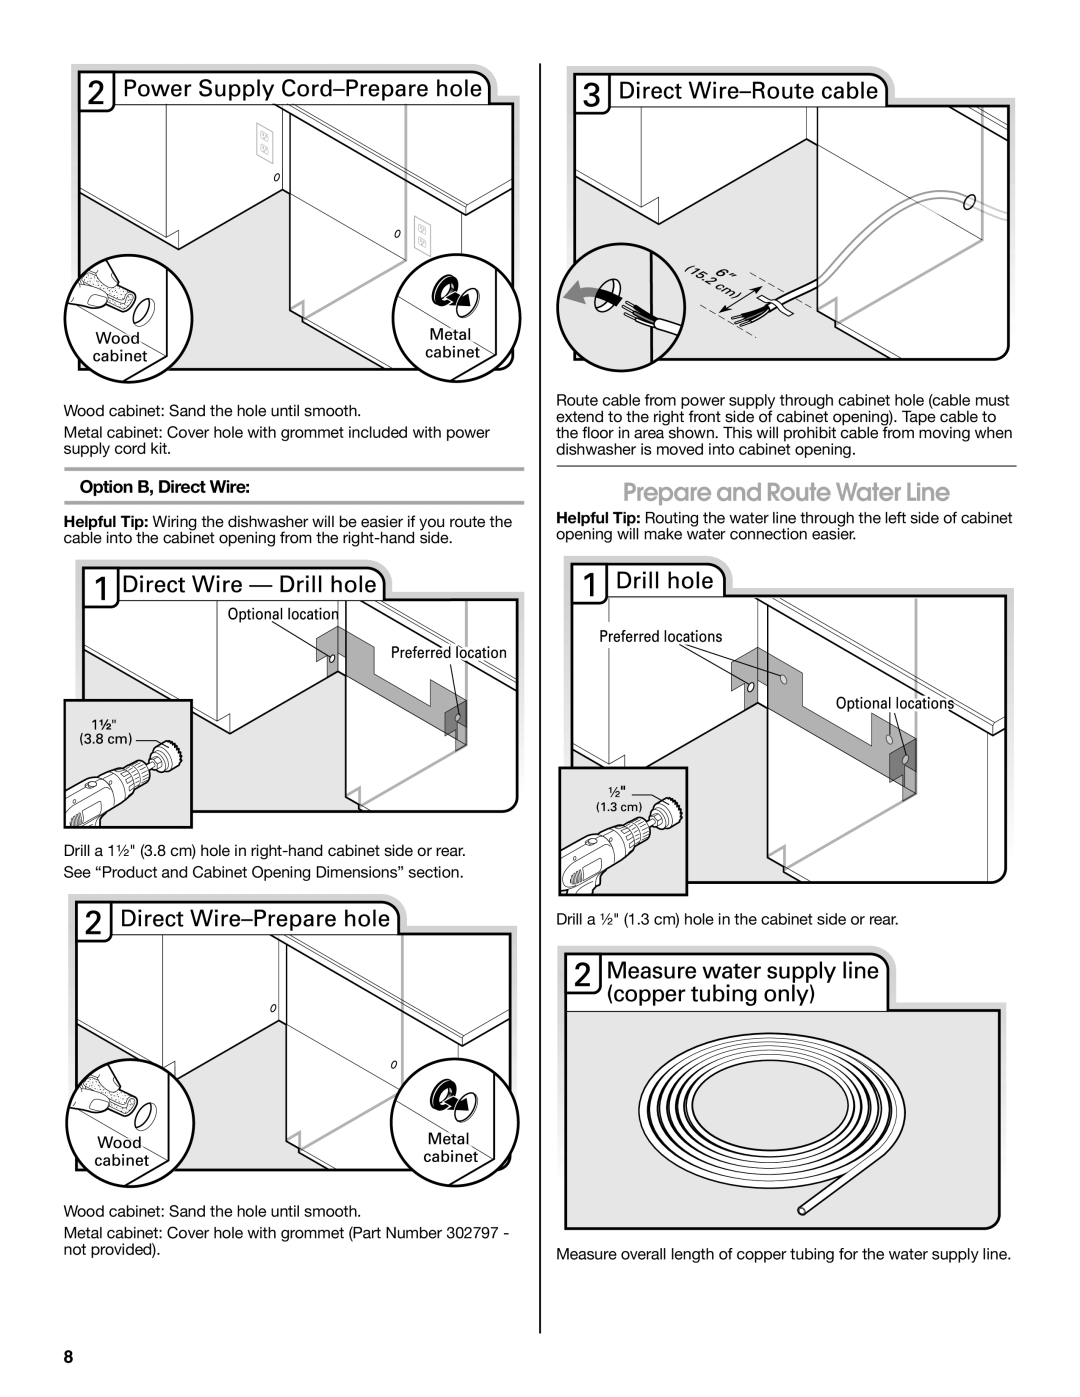 Whirlpool W10435039A installation instructions Prepare and Route Water Line, Option B, Direct Wire 